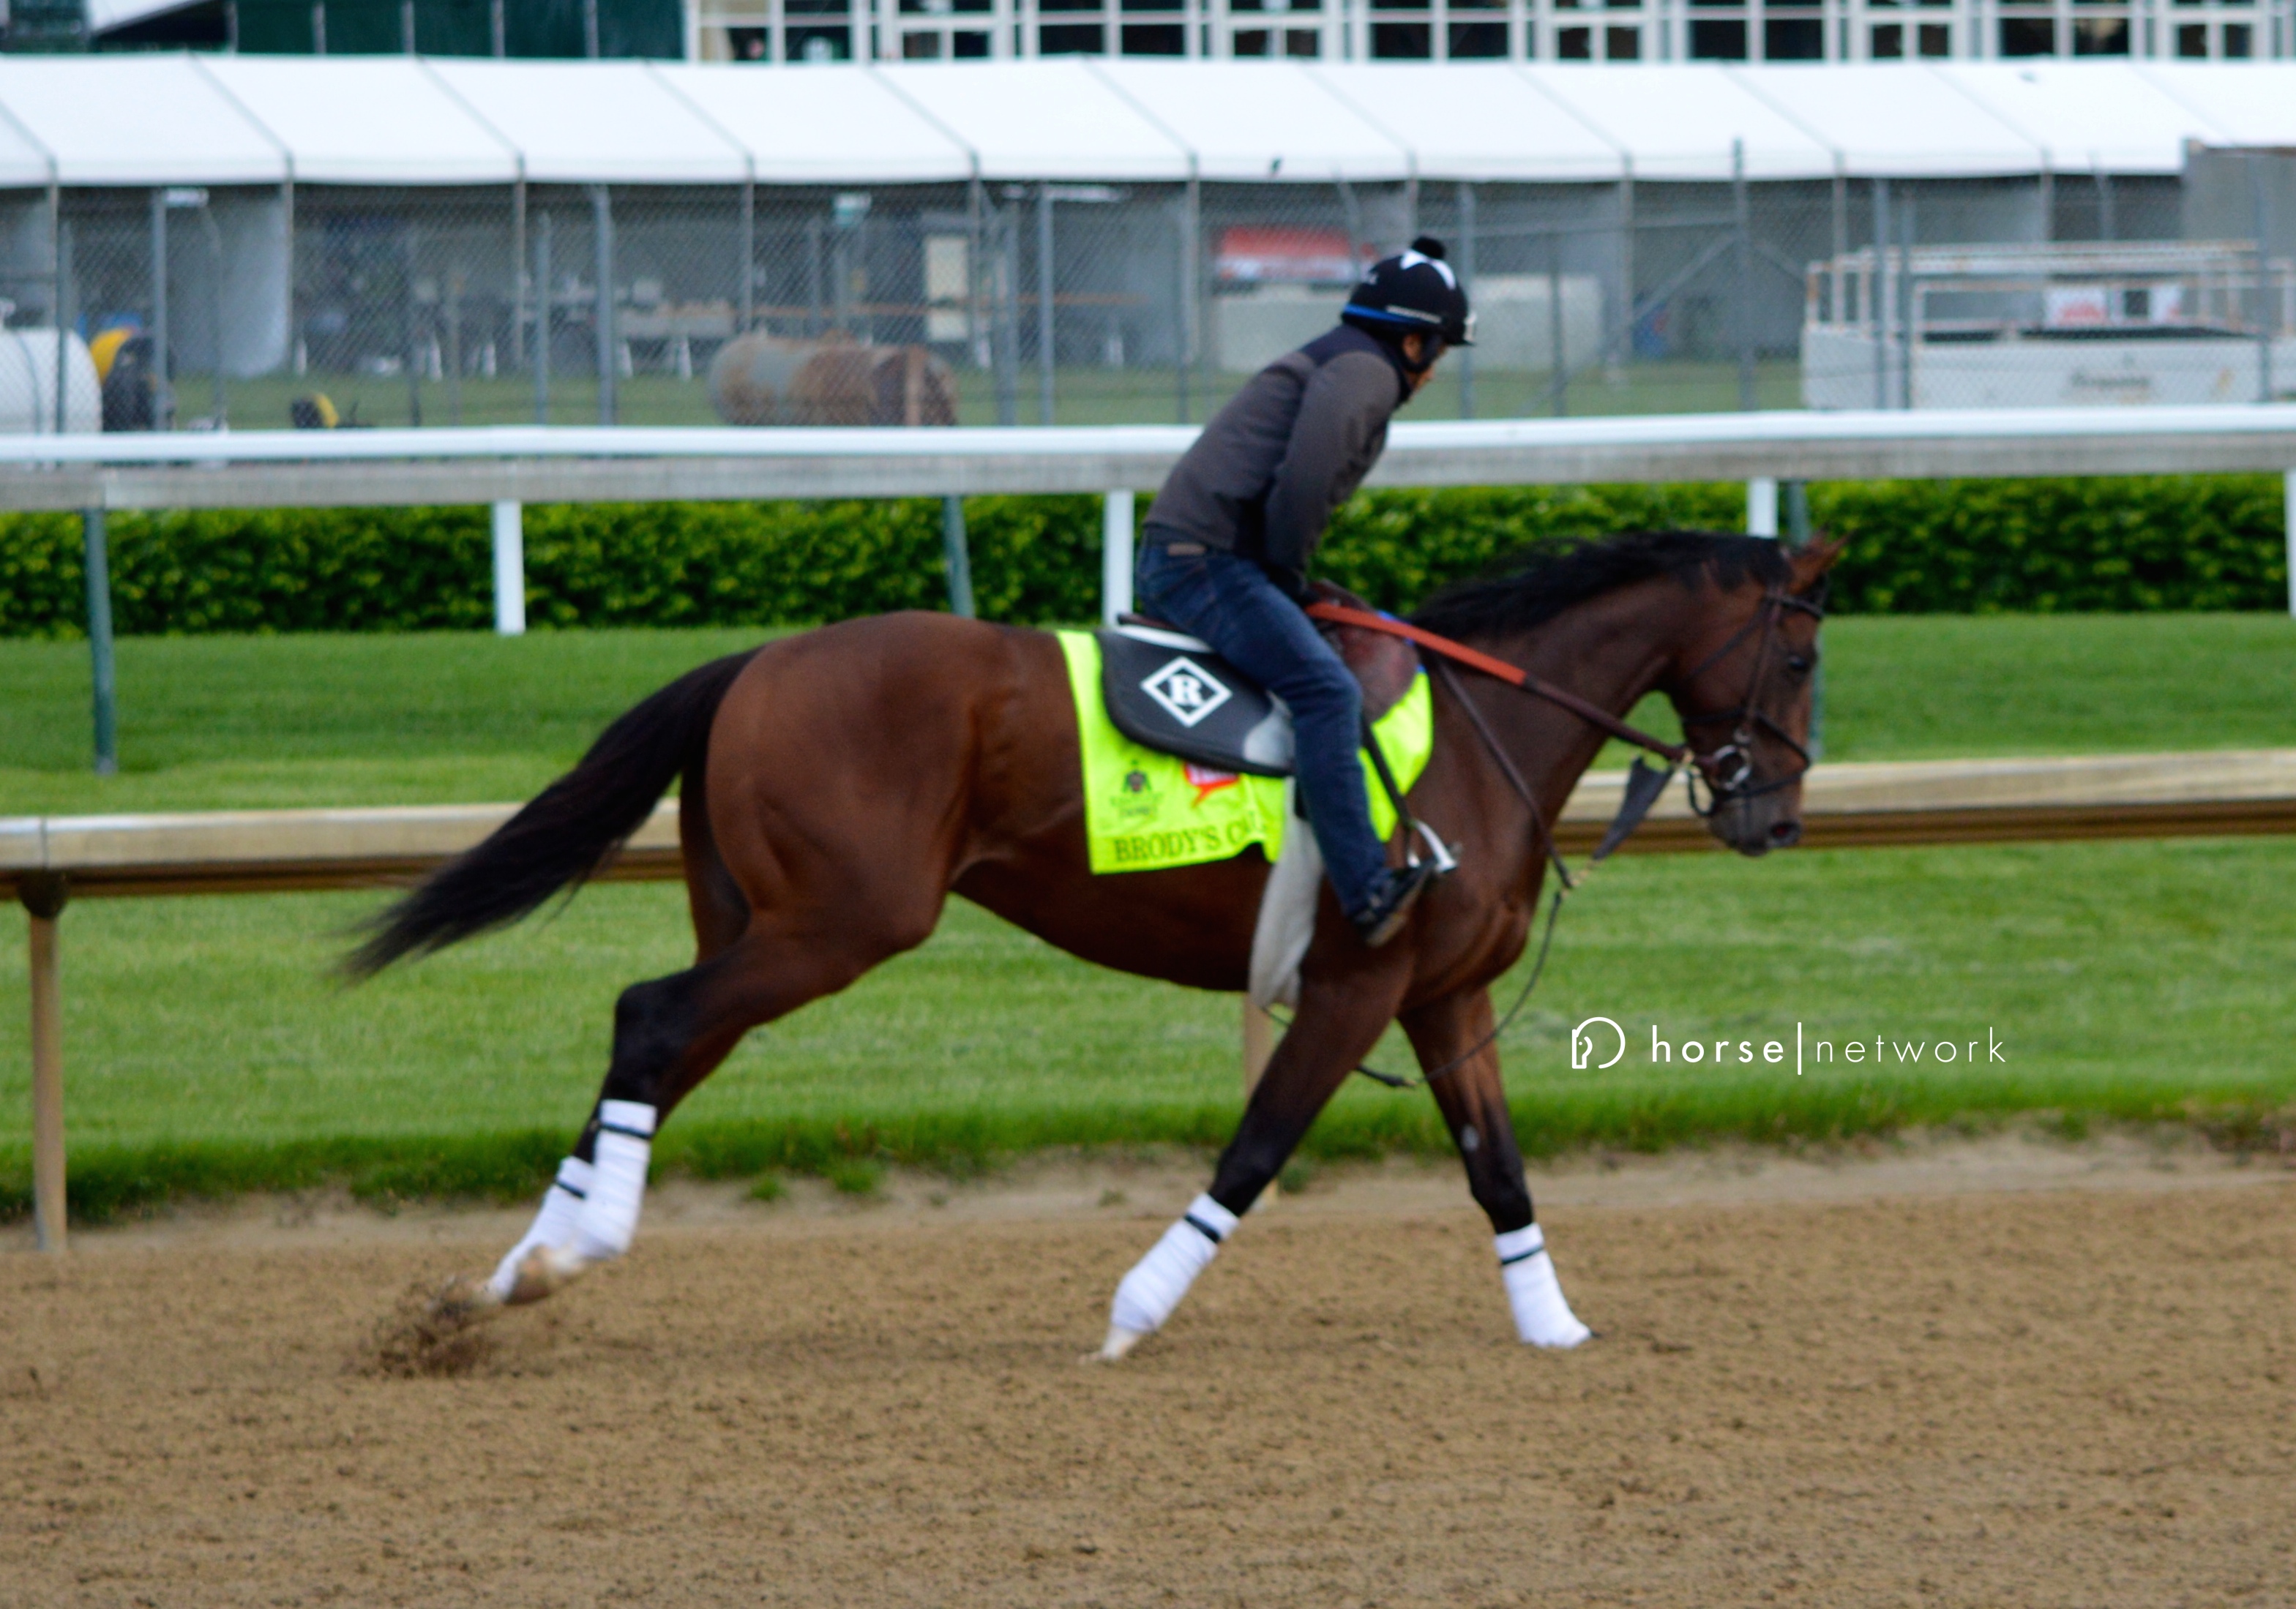 Kentucky Derby runner Brody's Cause looking as strong as ever.